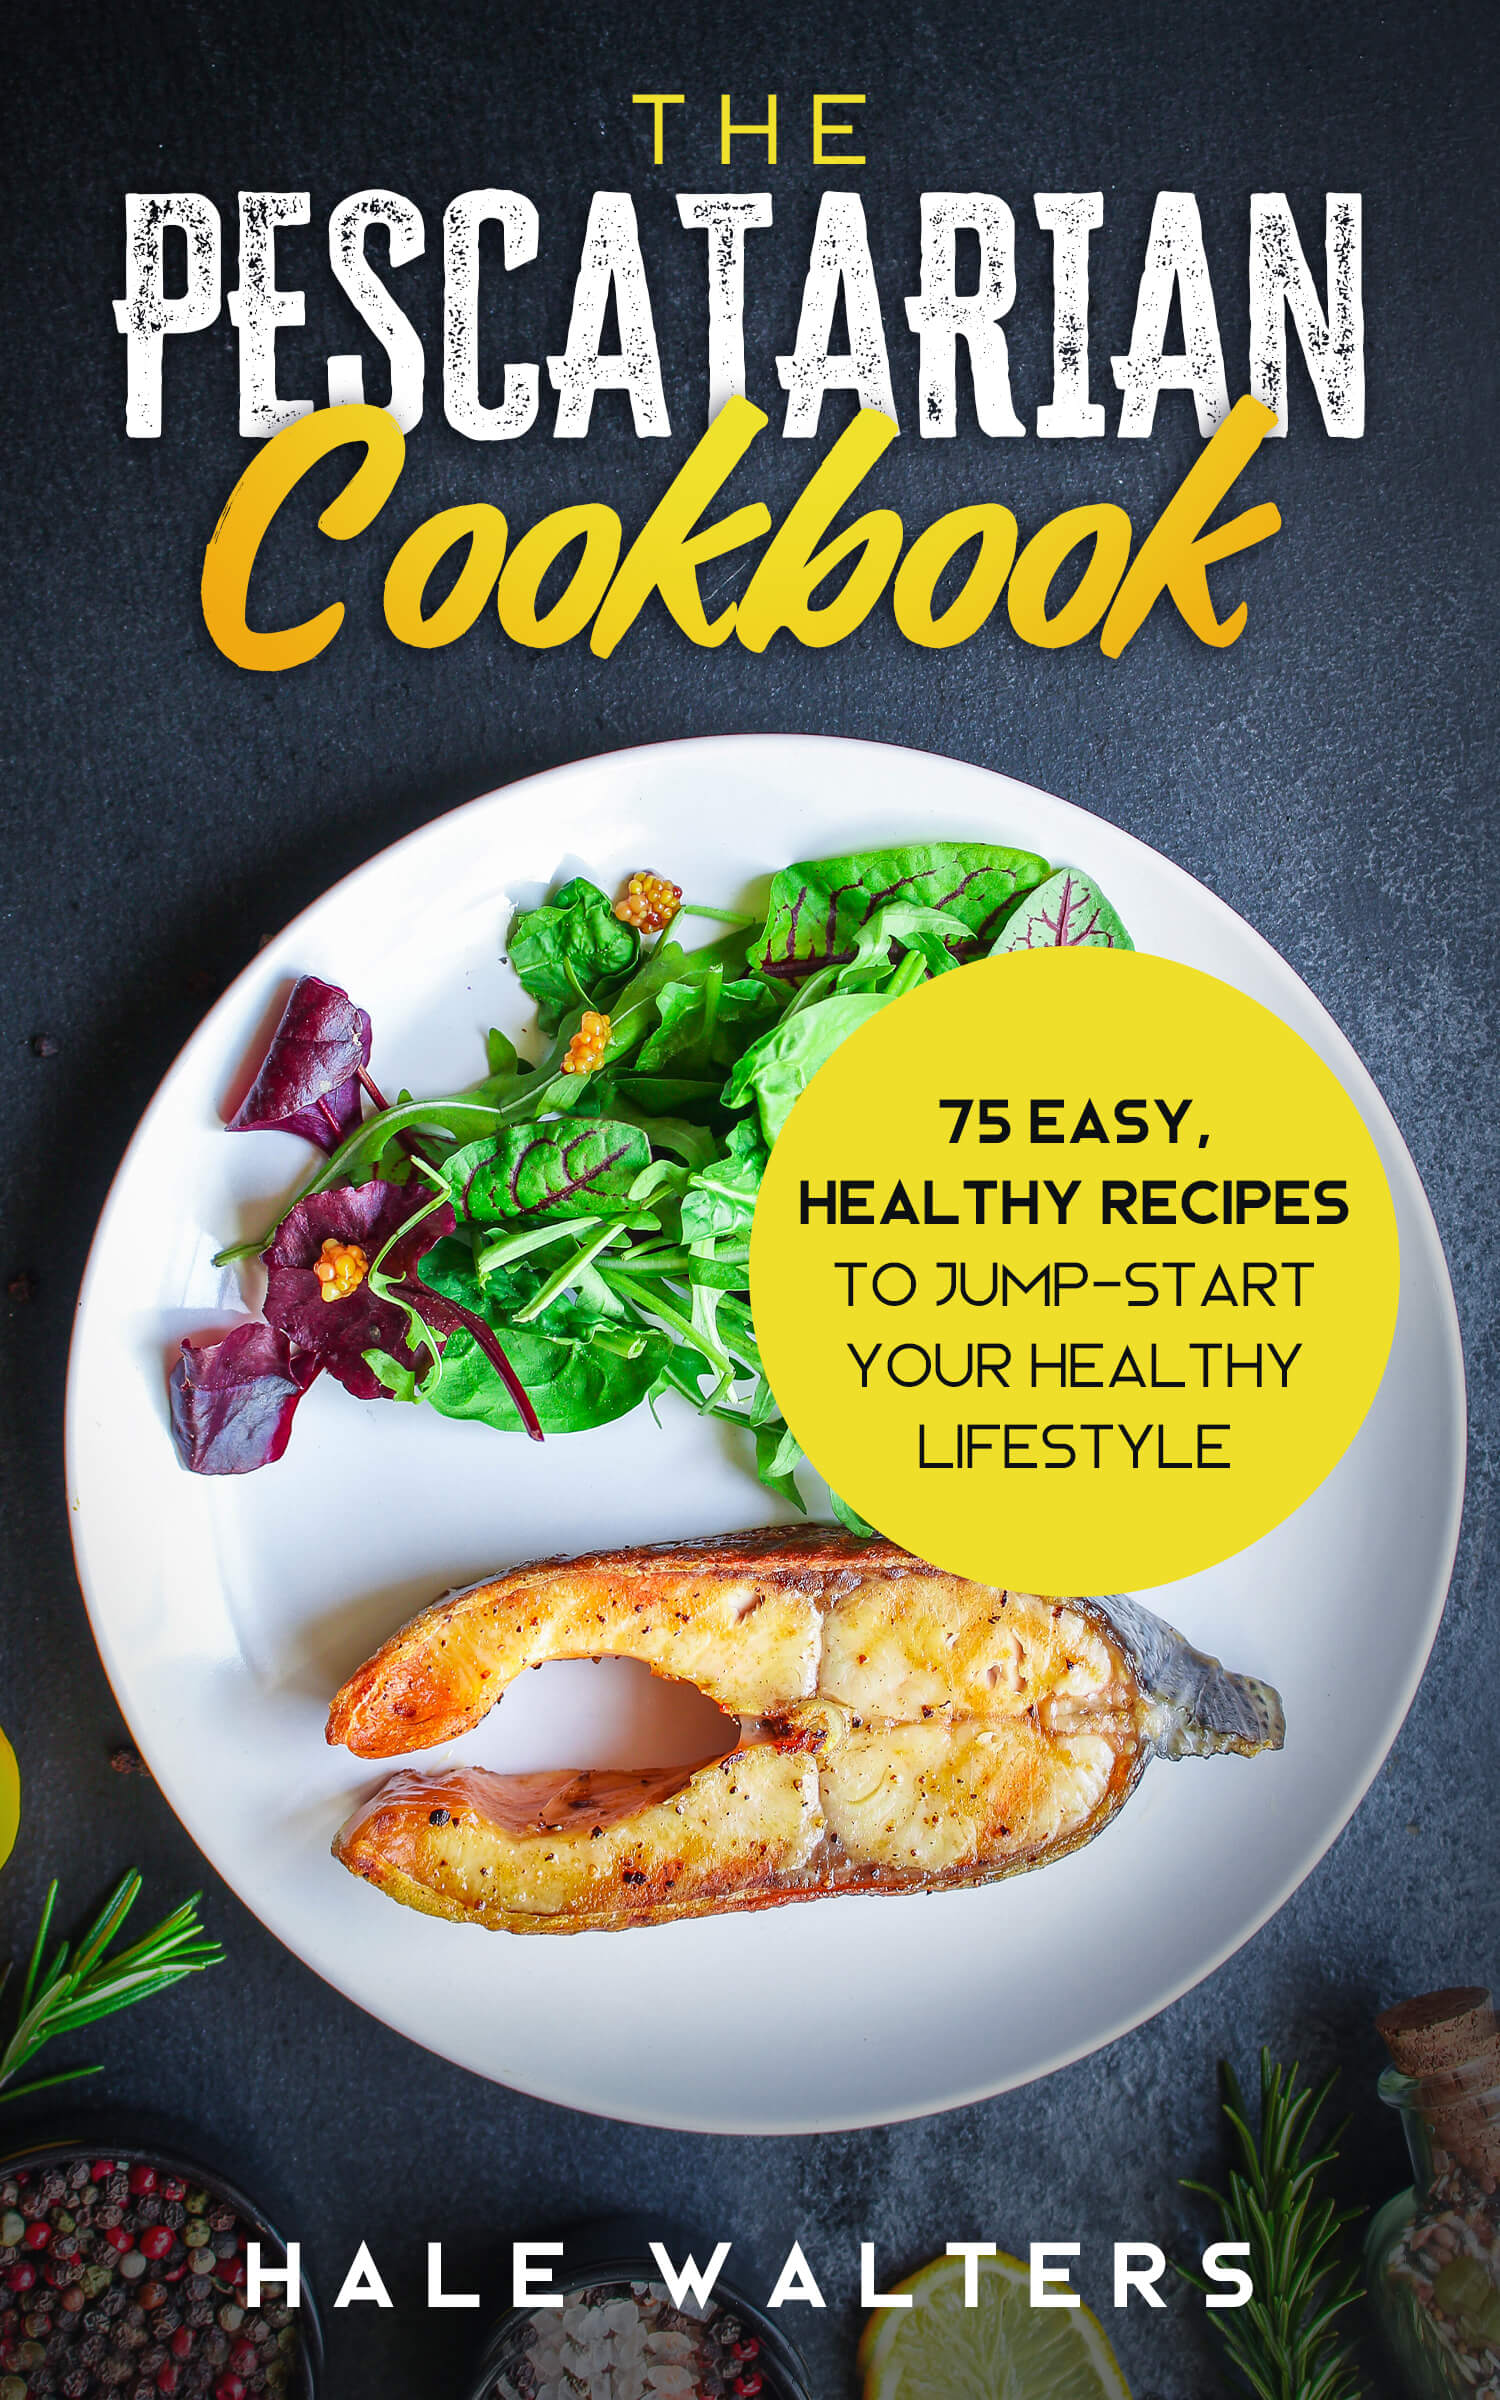 FREE: The Pescatarian Cookbook by Hale Walter